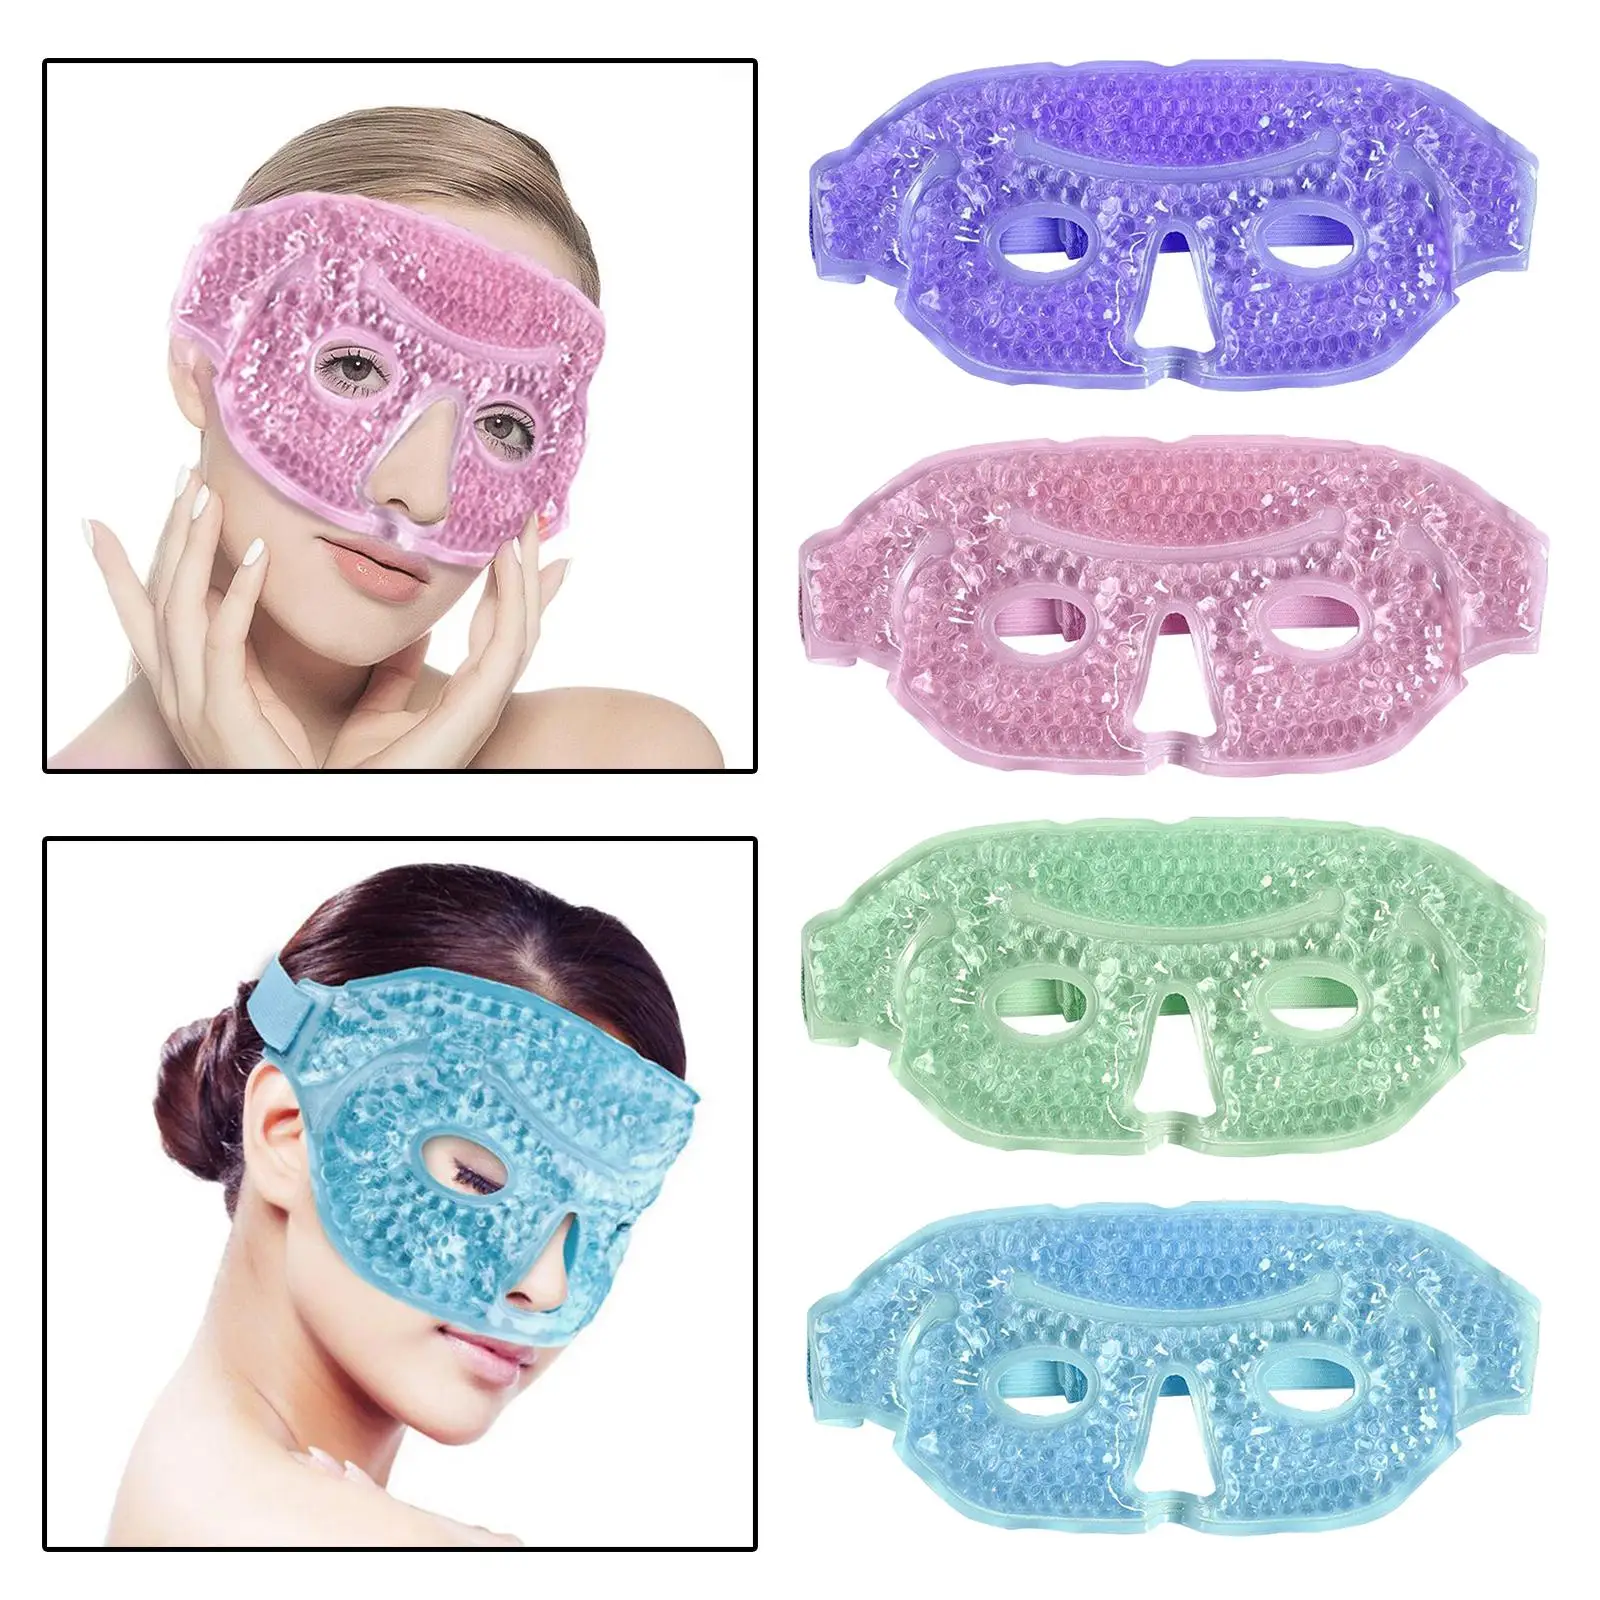 

Ice Face / Eye Mask Heated Warm Cooling Hot Cold Therapy with Plush Backing Reusable Gel Mask Reduce Dark Circles Relieve